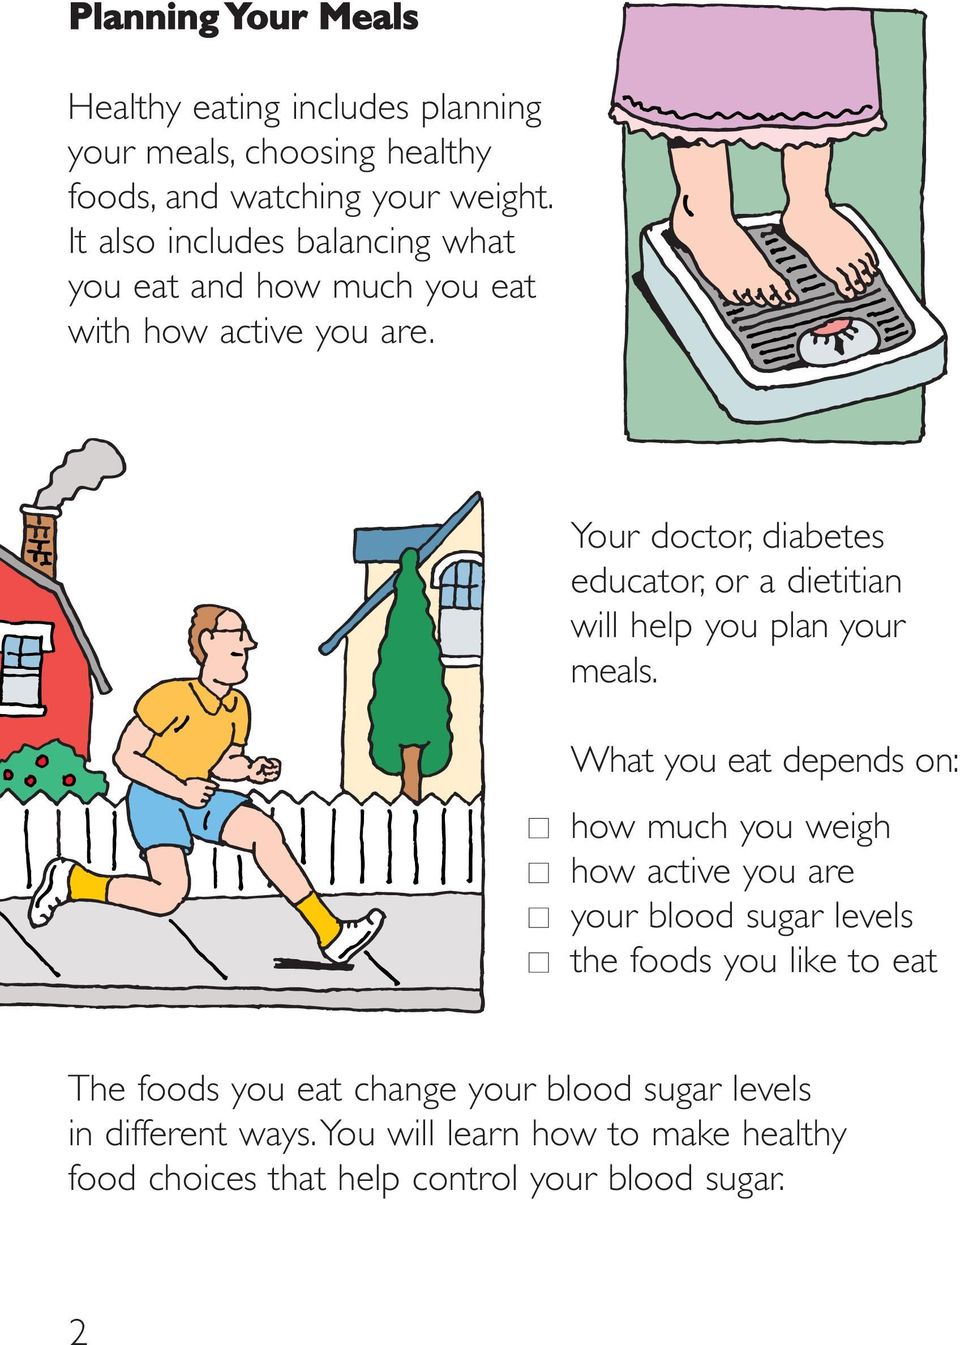 Your doctor, diabetes educator, or a dietitian will help you plan your meals.